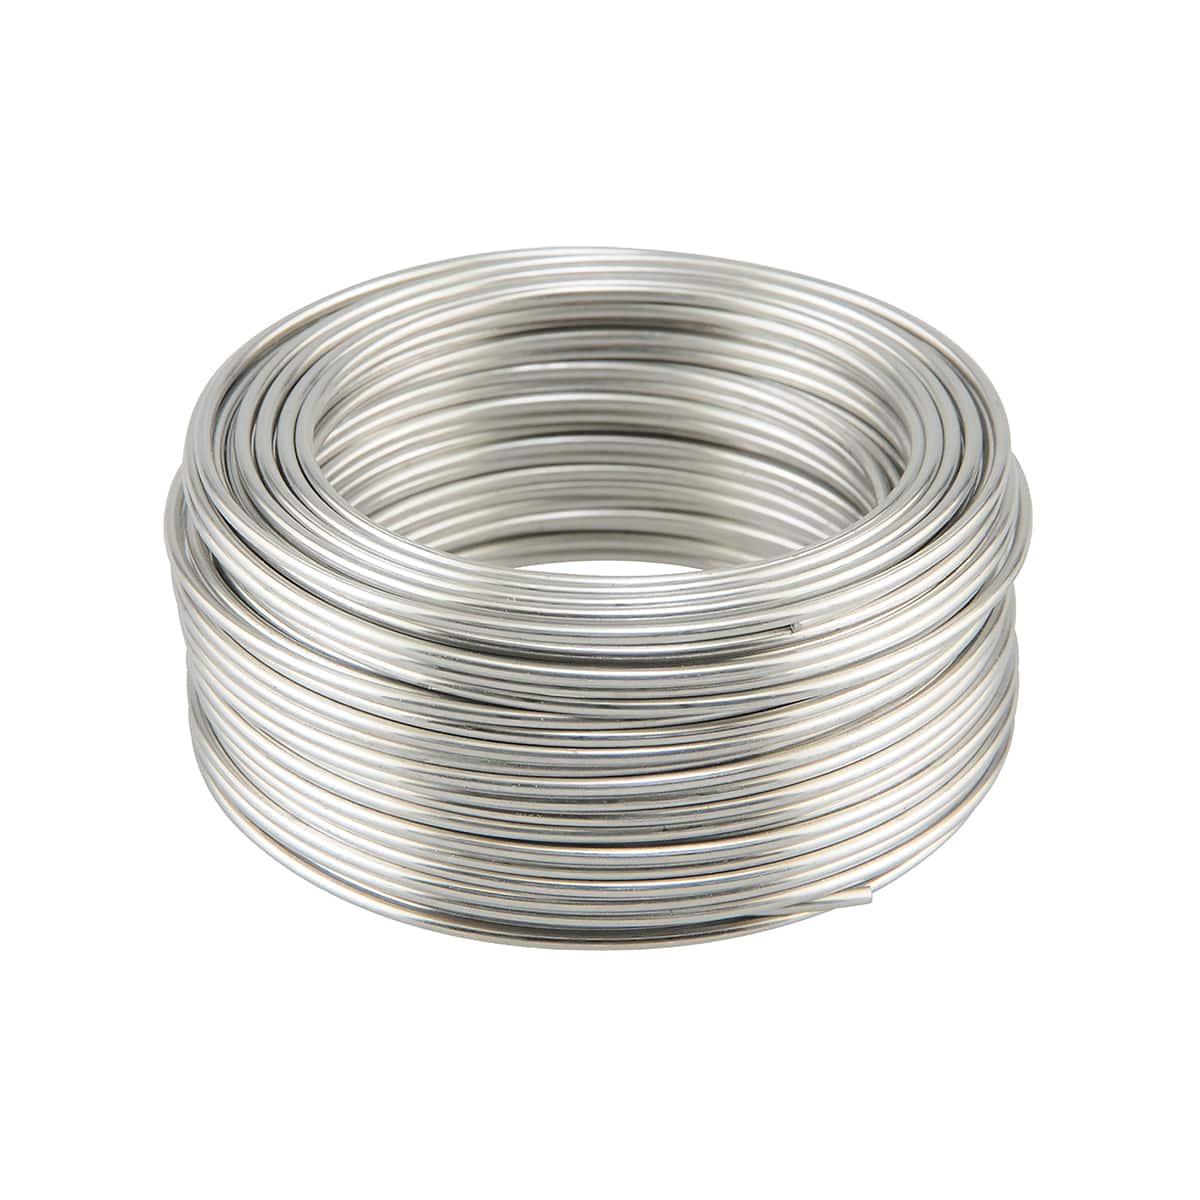 Buy Multi-colored Aluminum Craft Wire, Flexible Metal Wire for